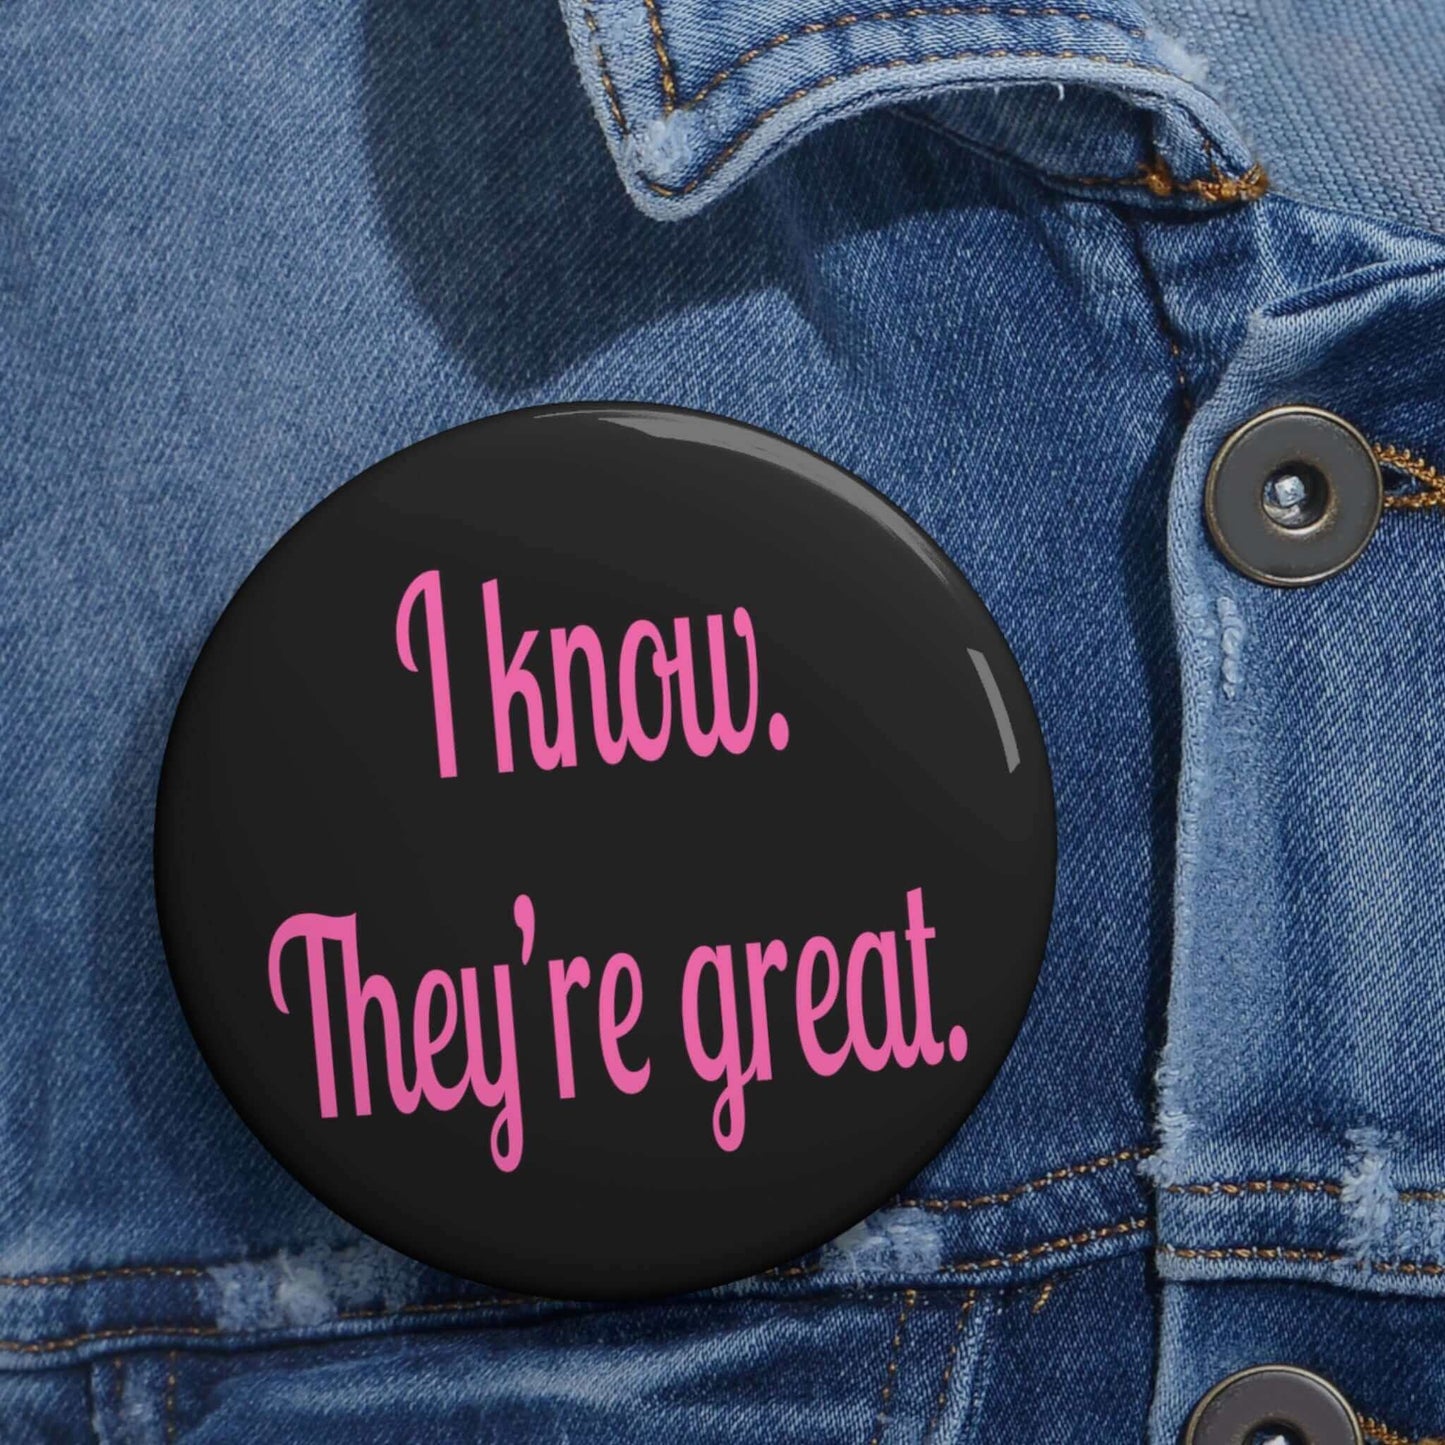 Great boobs pinback button